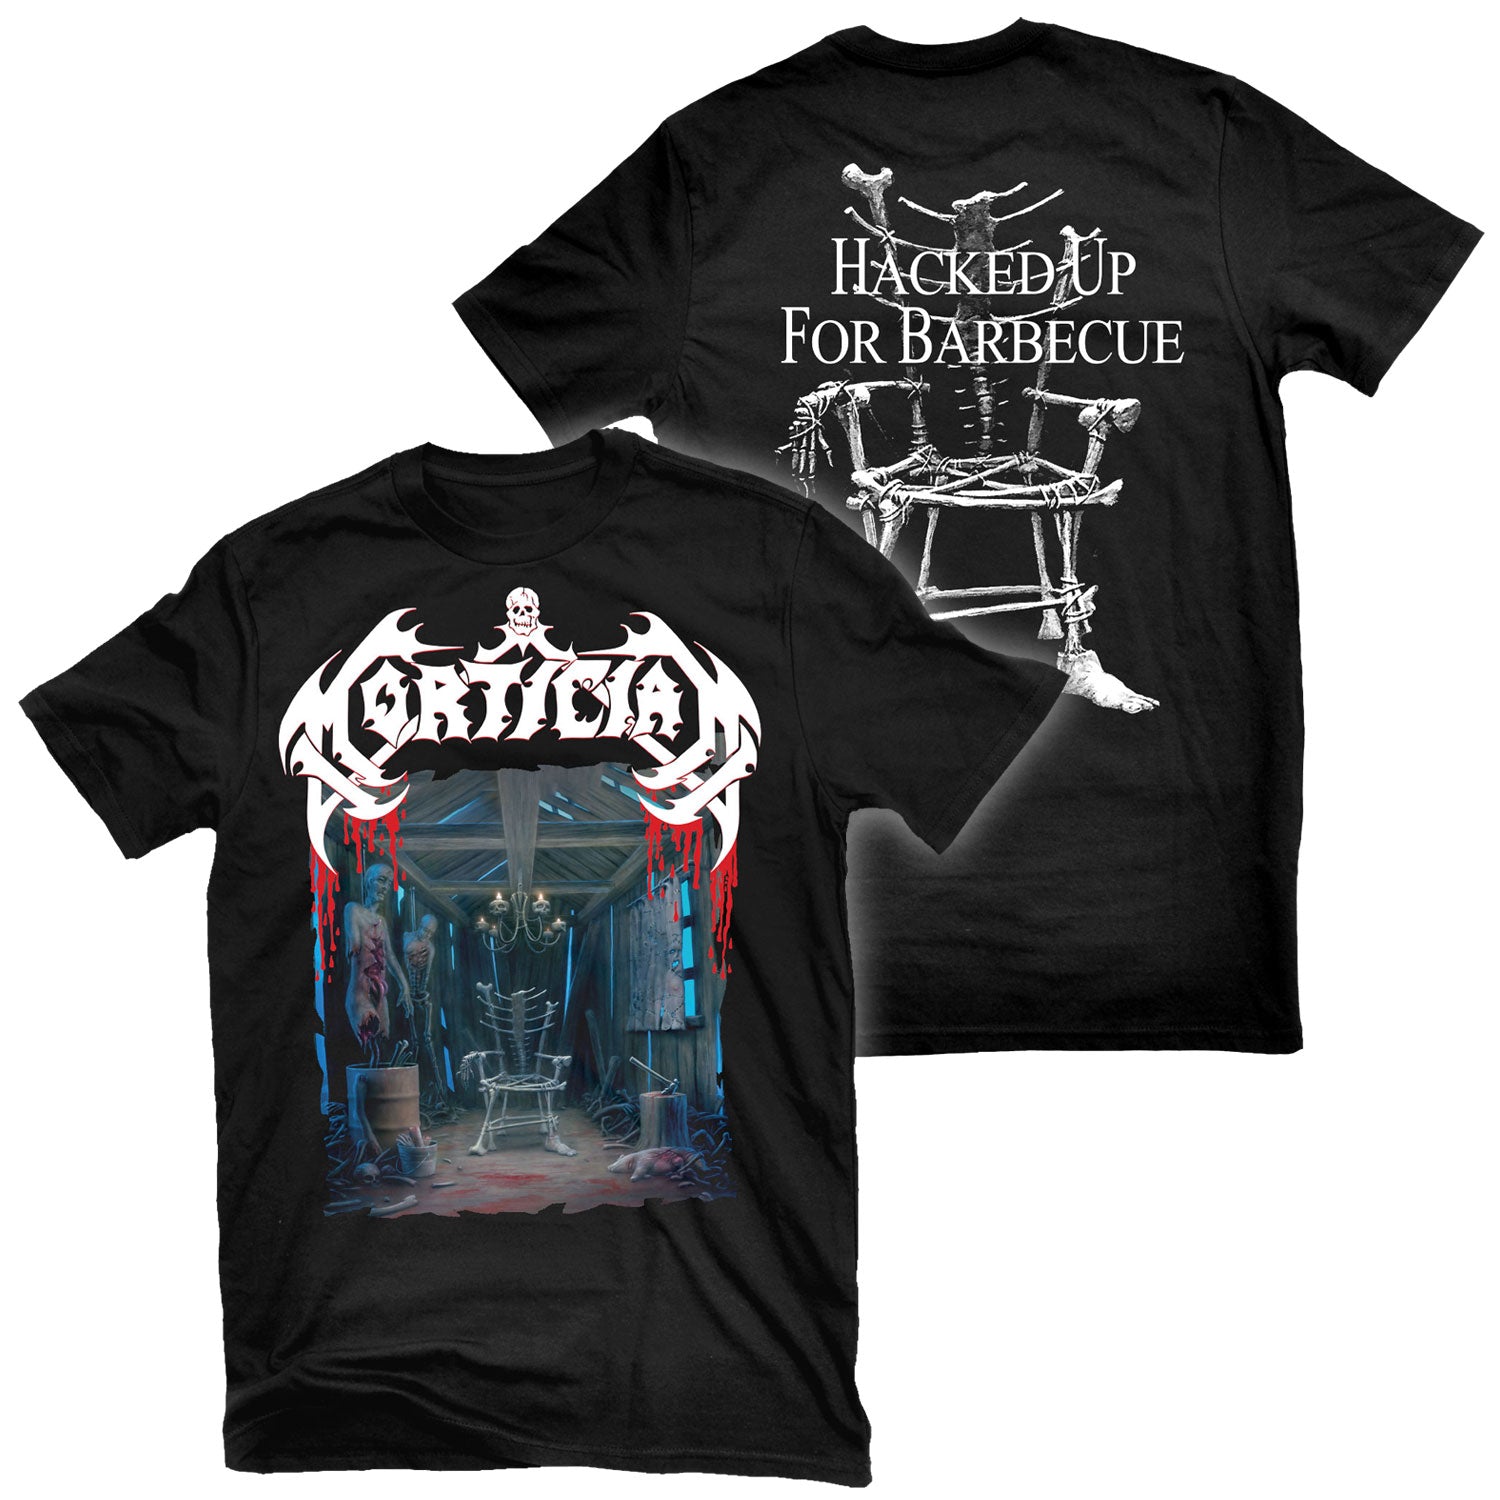 Mortician "Hacked Up for Barbecue" T-Shirt